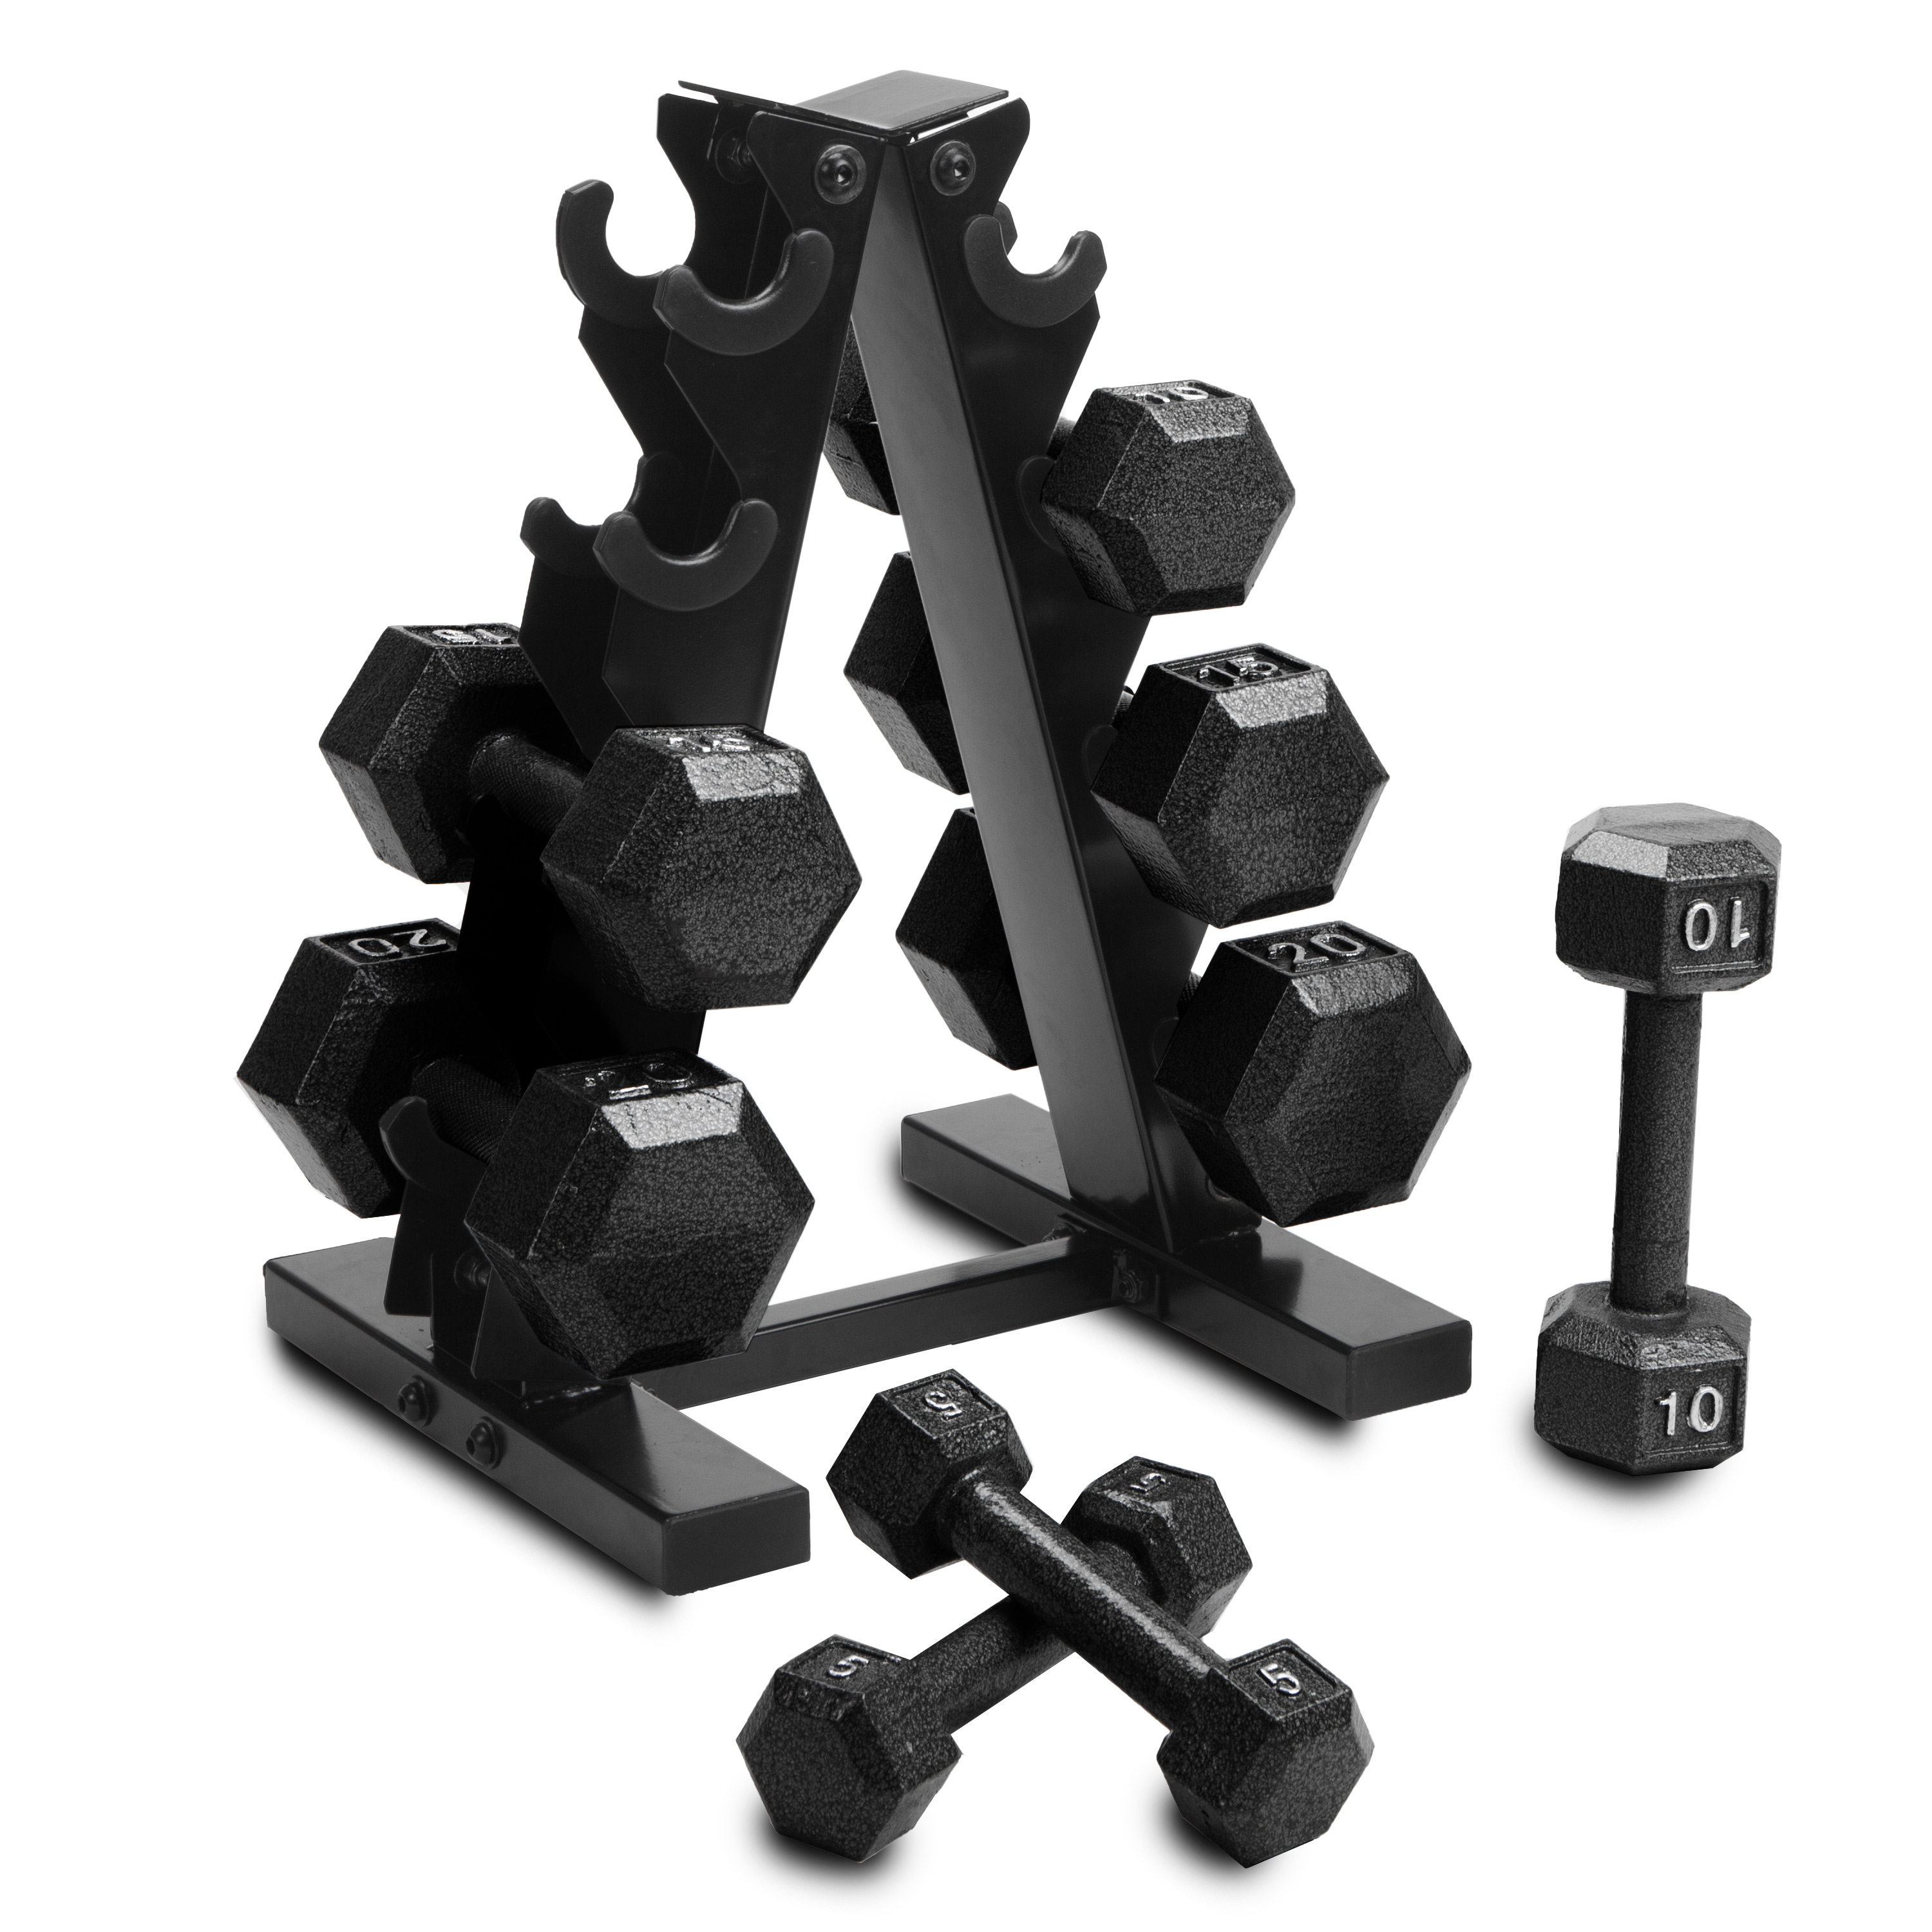 Cap Barbell 100 lb Cast Iron Hex Dumbbell Weight Set with Rack, Black - image 3 of 7